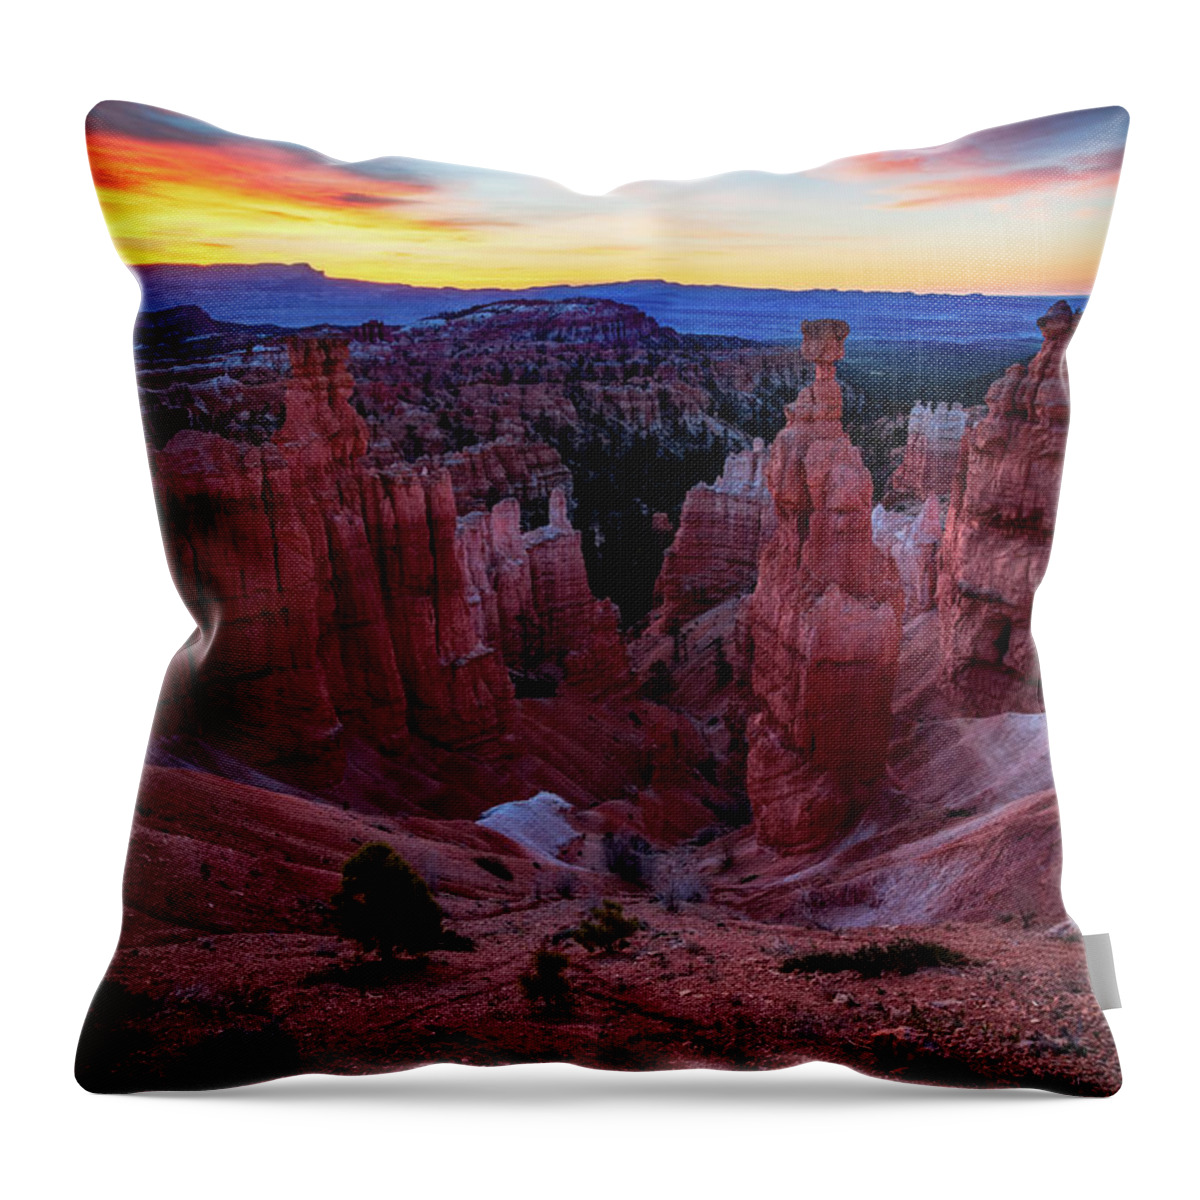 Amaizing Throw Pillow featuring the photograph Thor's Light by Edgars Erglis